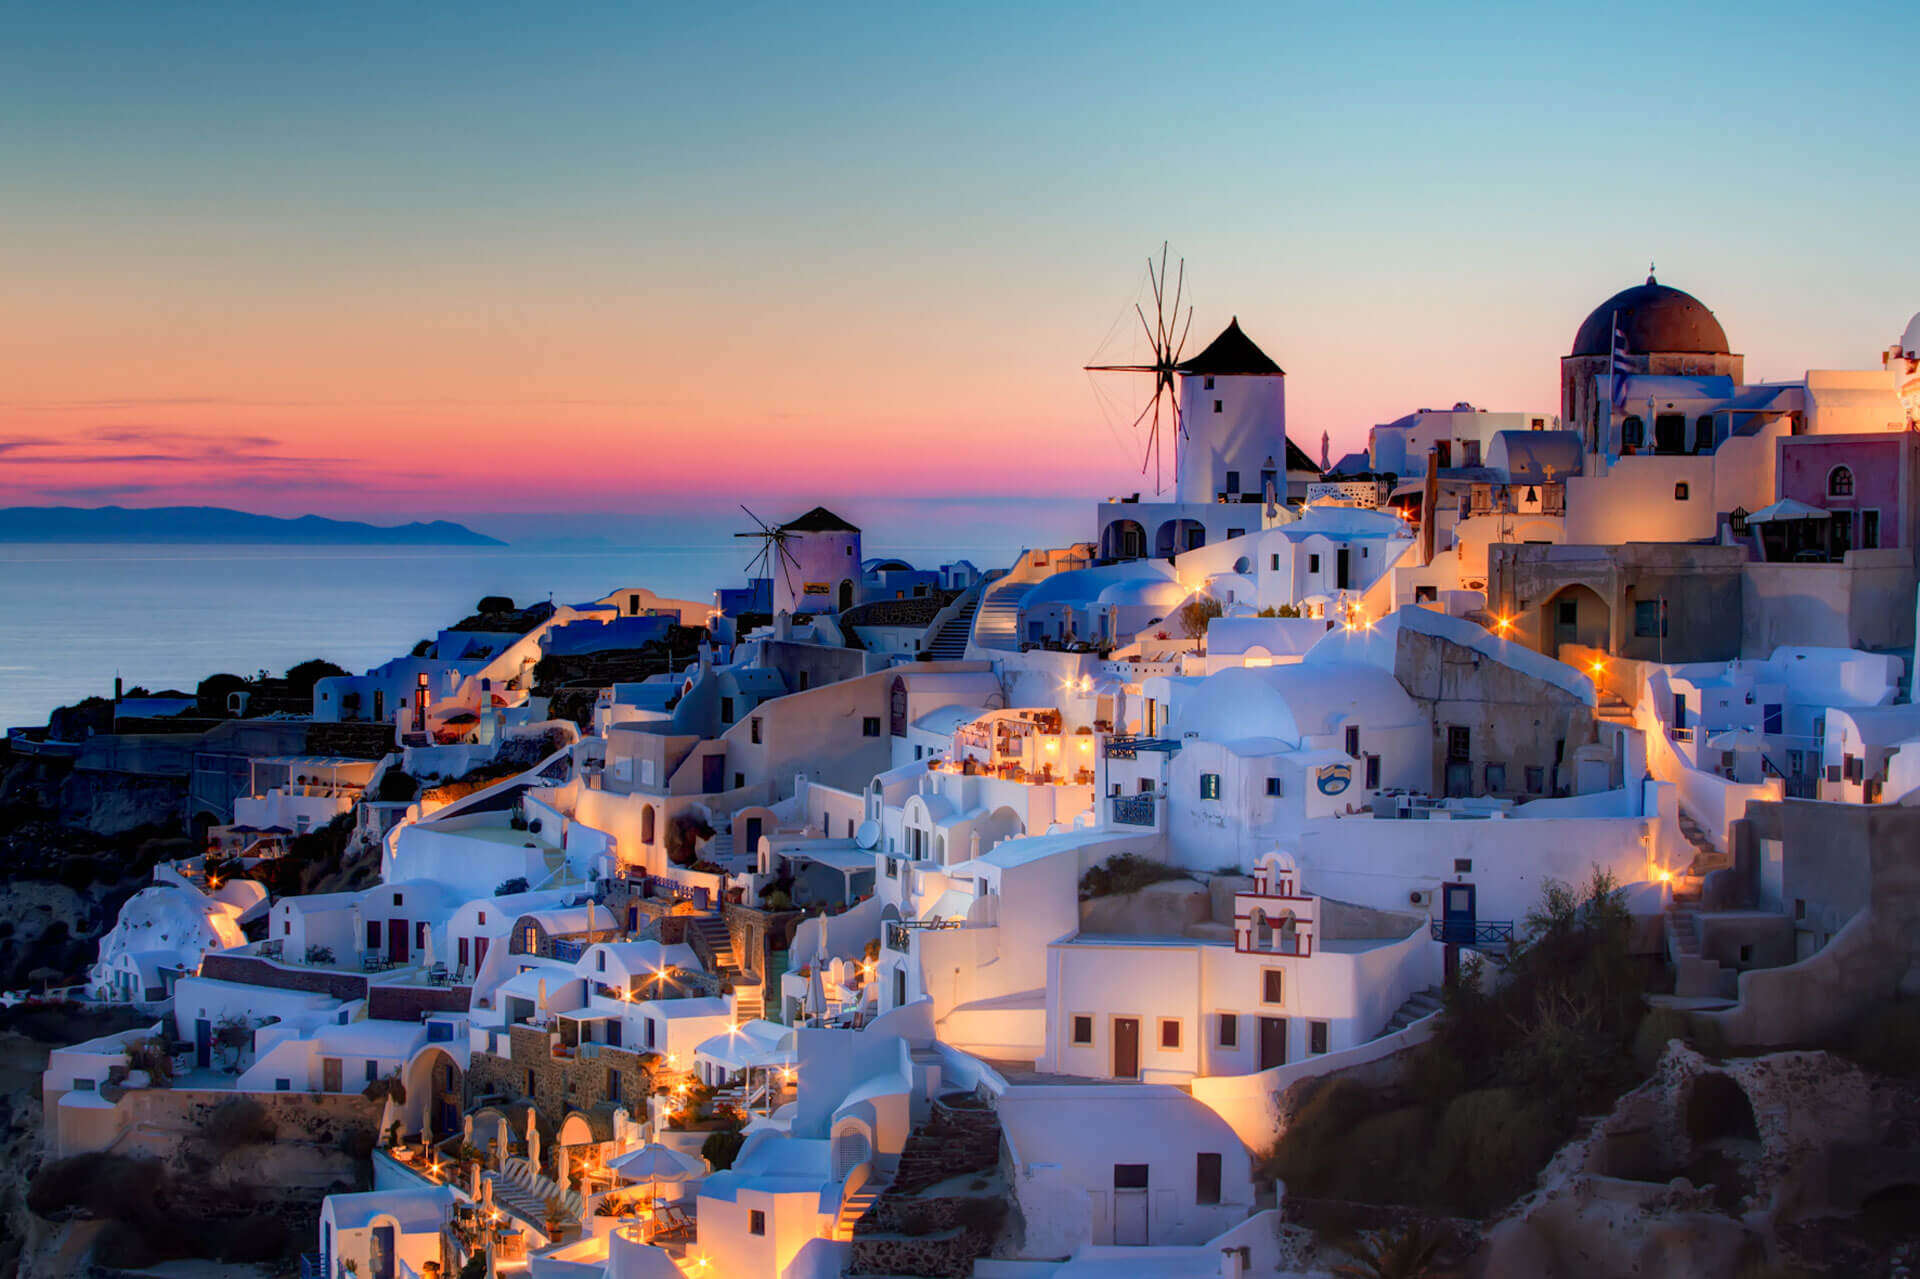 Oia Village during sunset